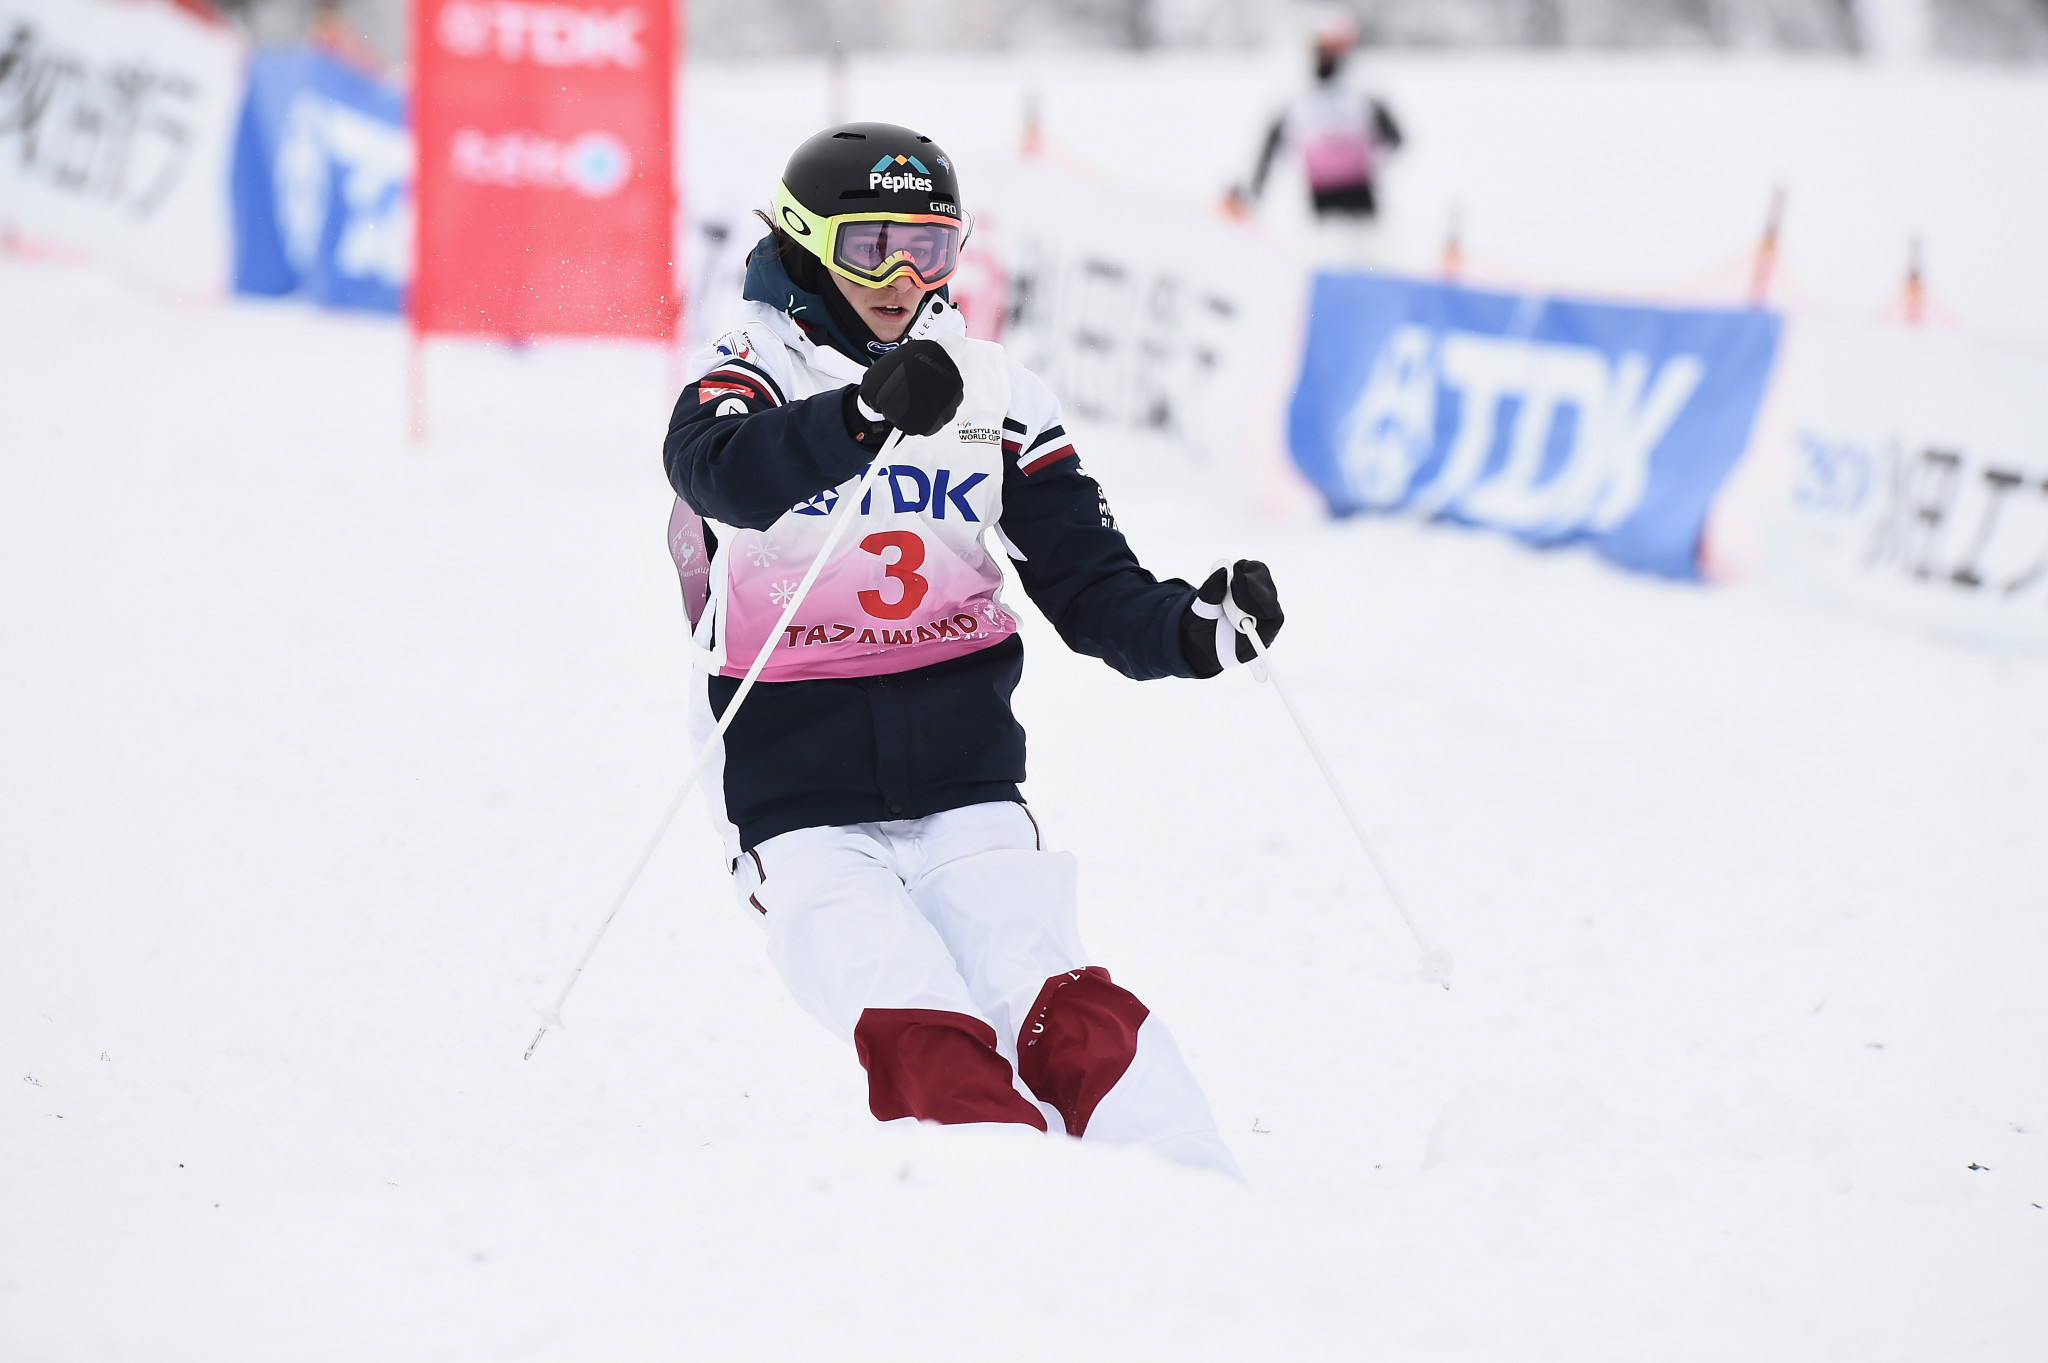 Battle for women's moguls World Cup title centre stage in Airolo